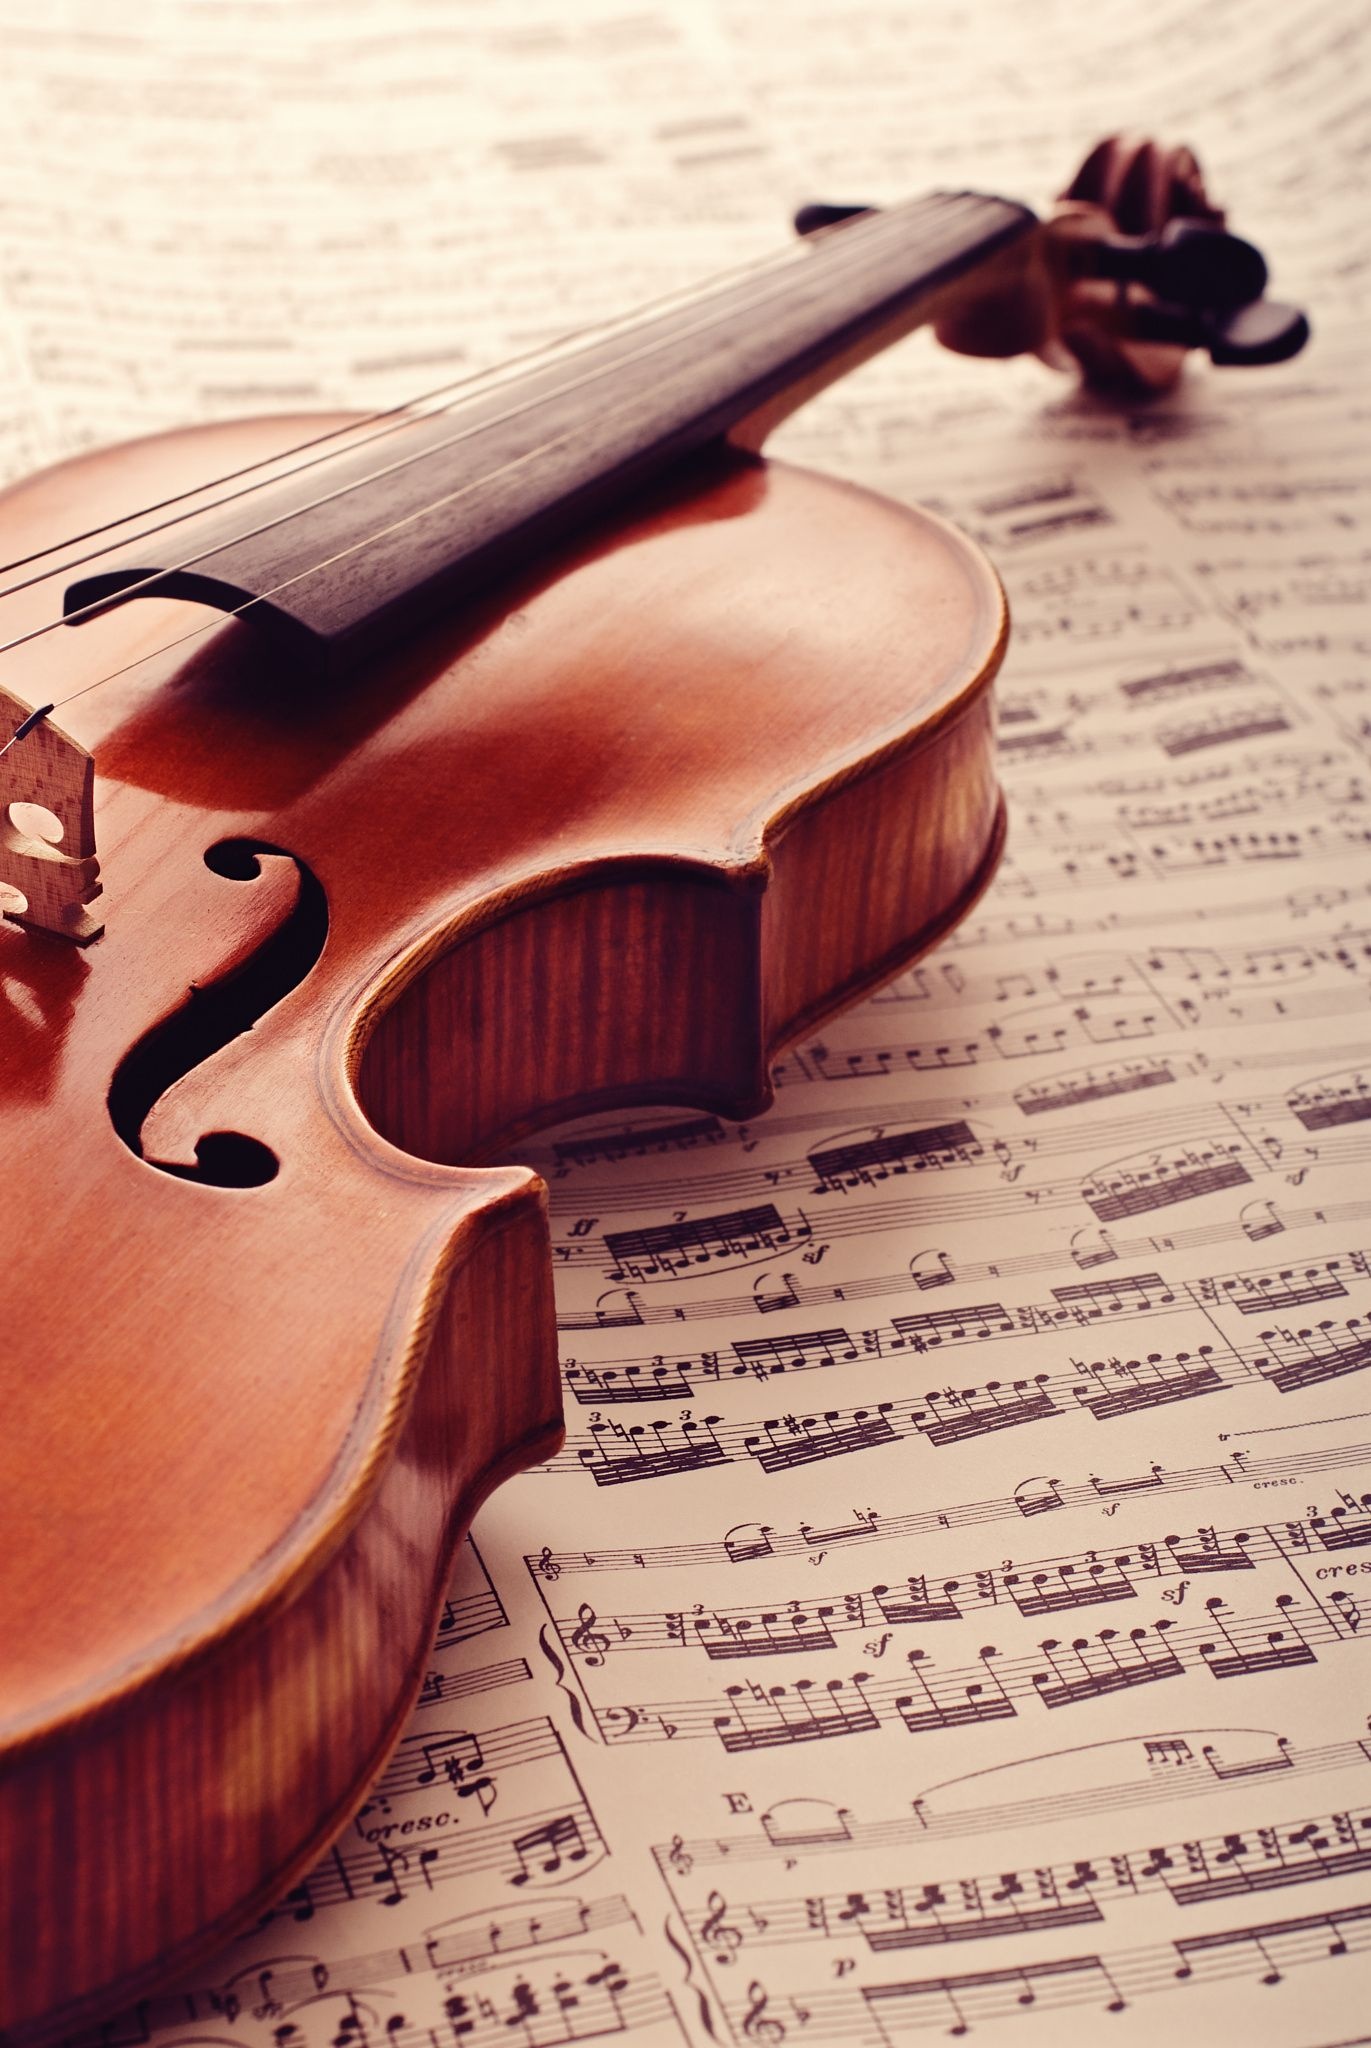 Violin: Wooden Chordophone, Notes, Hollow Wooden Body, Made Of Marple, Varnish, Music. 1380x2050 HD Wallpaper.